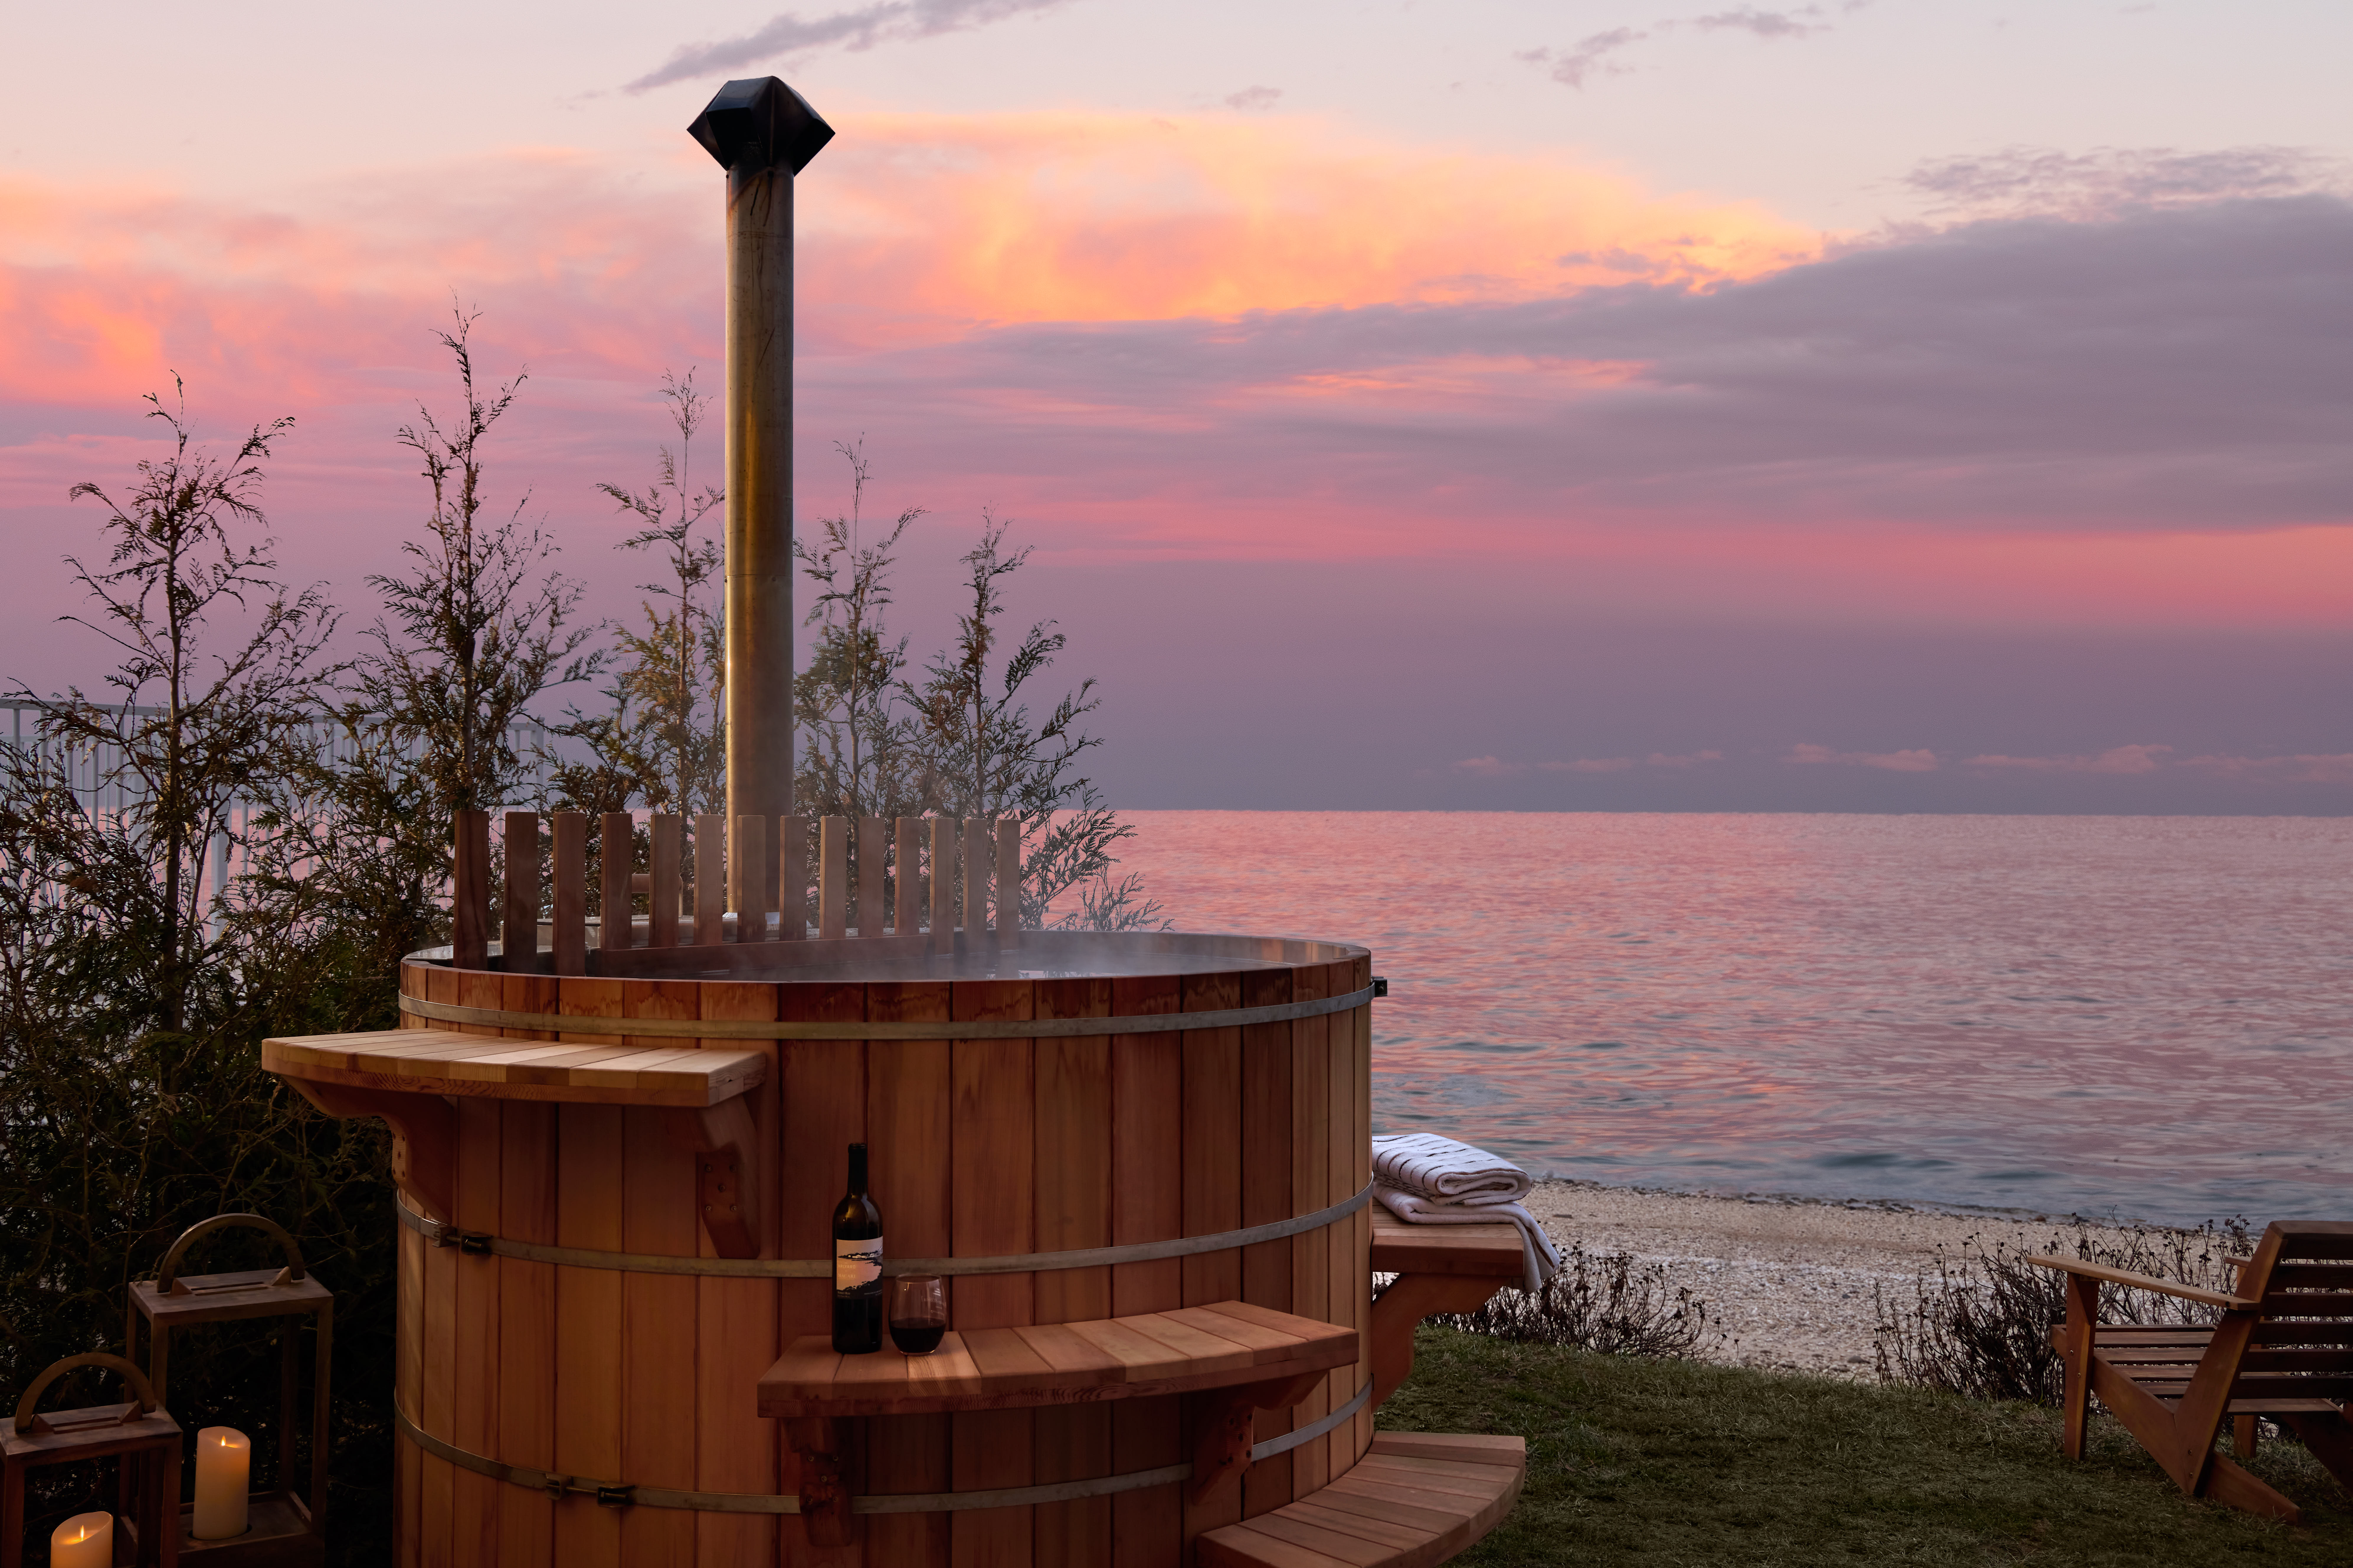 Hotels with Private Jacuzzis and Hot Tubs